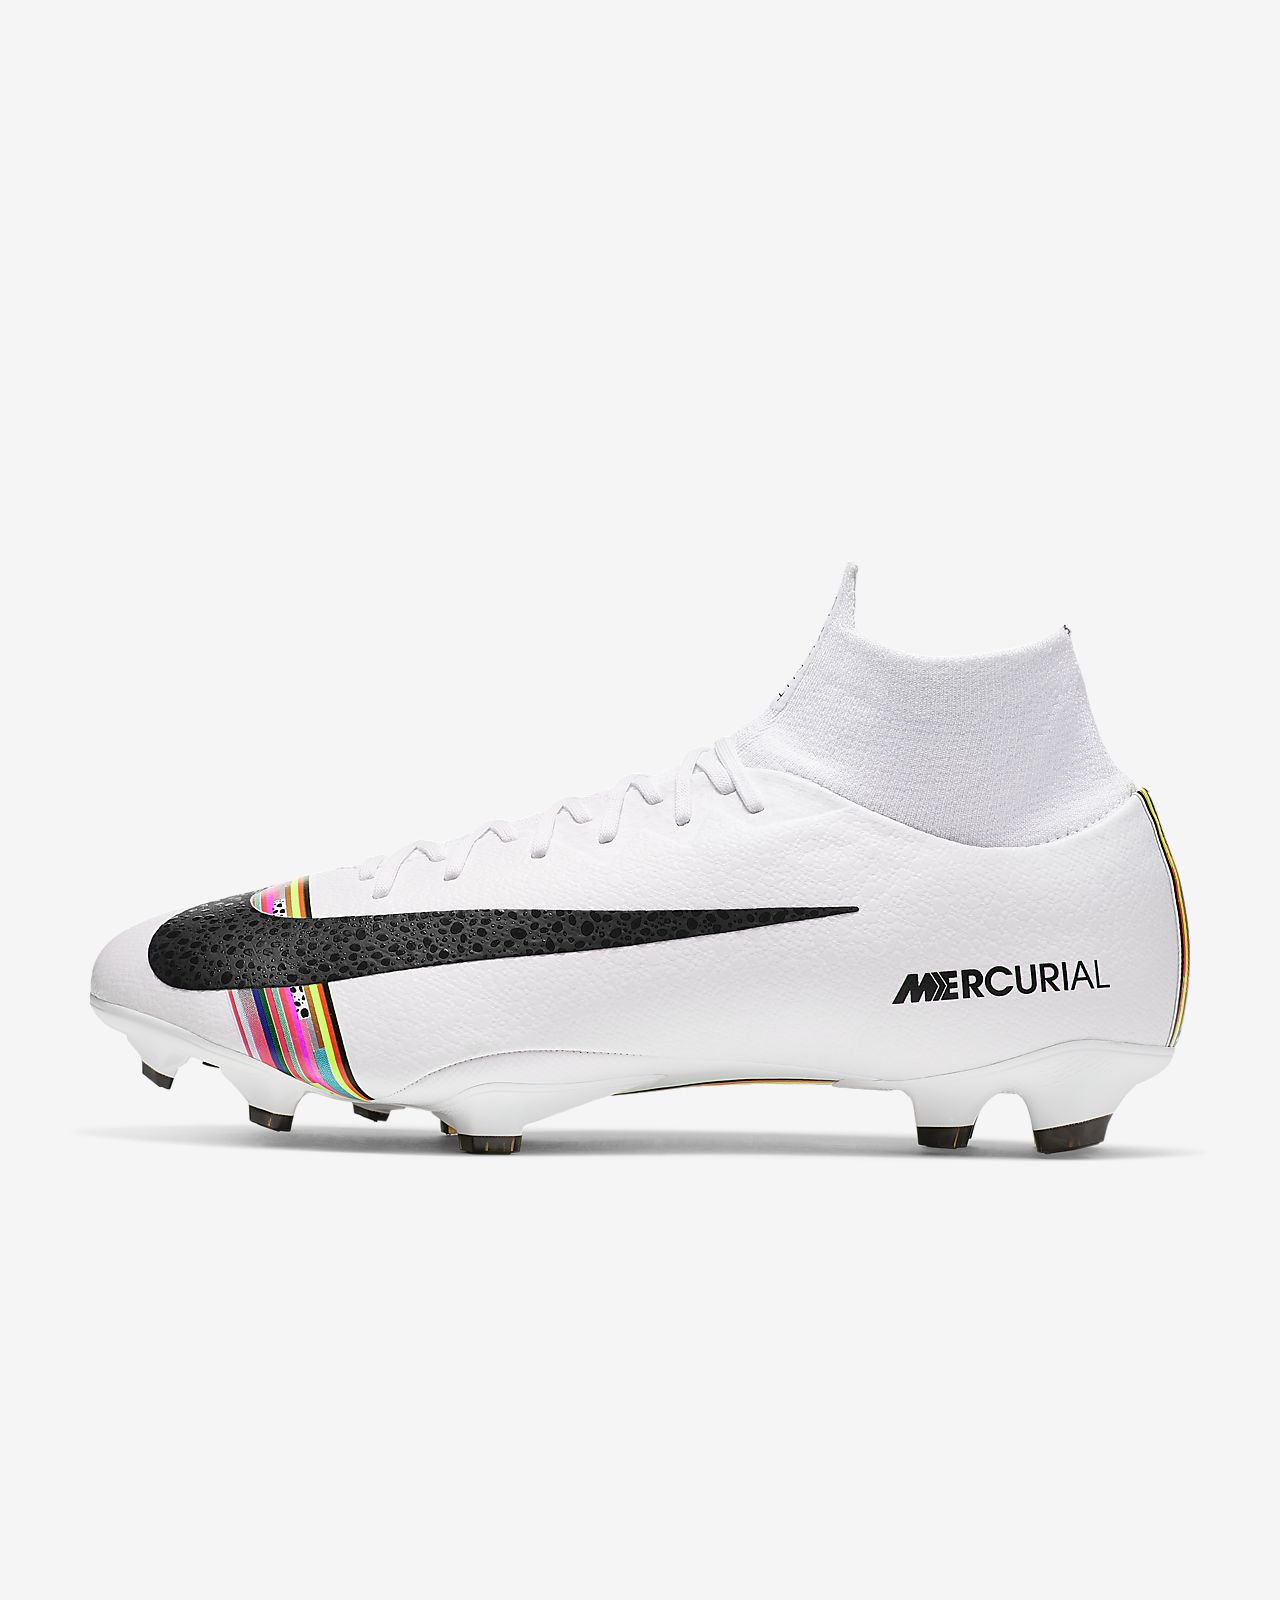 Buy Nike Mercurial Superfly 7 Pro Firm Ground Only 06.